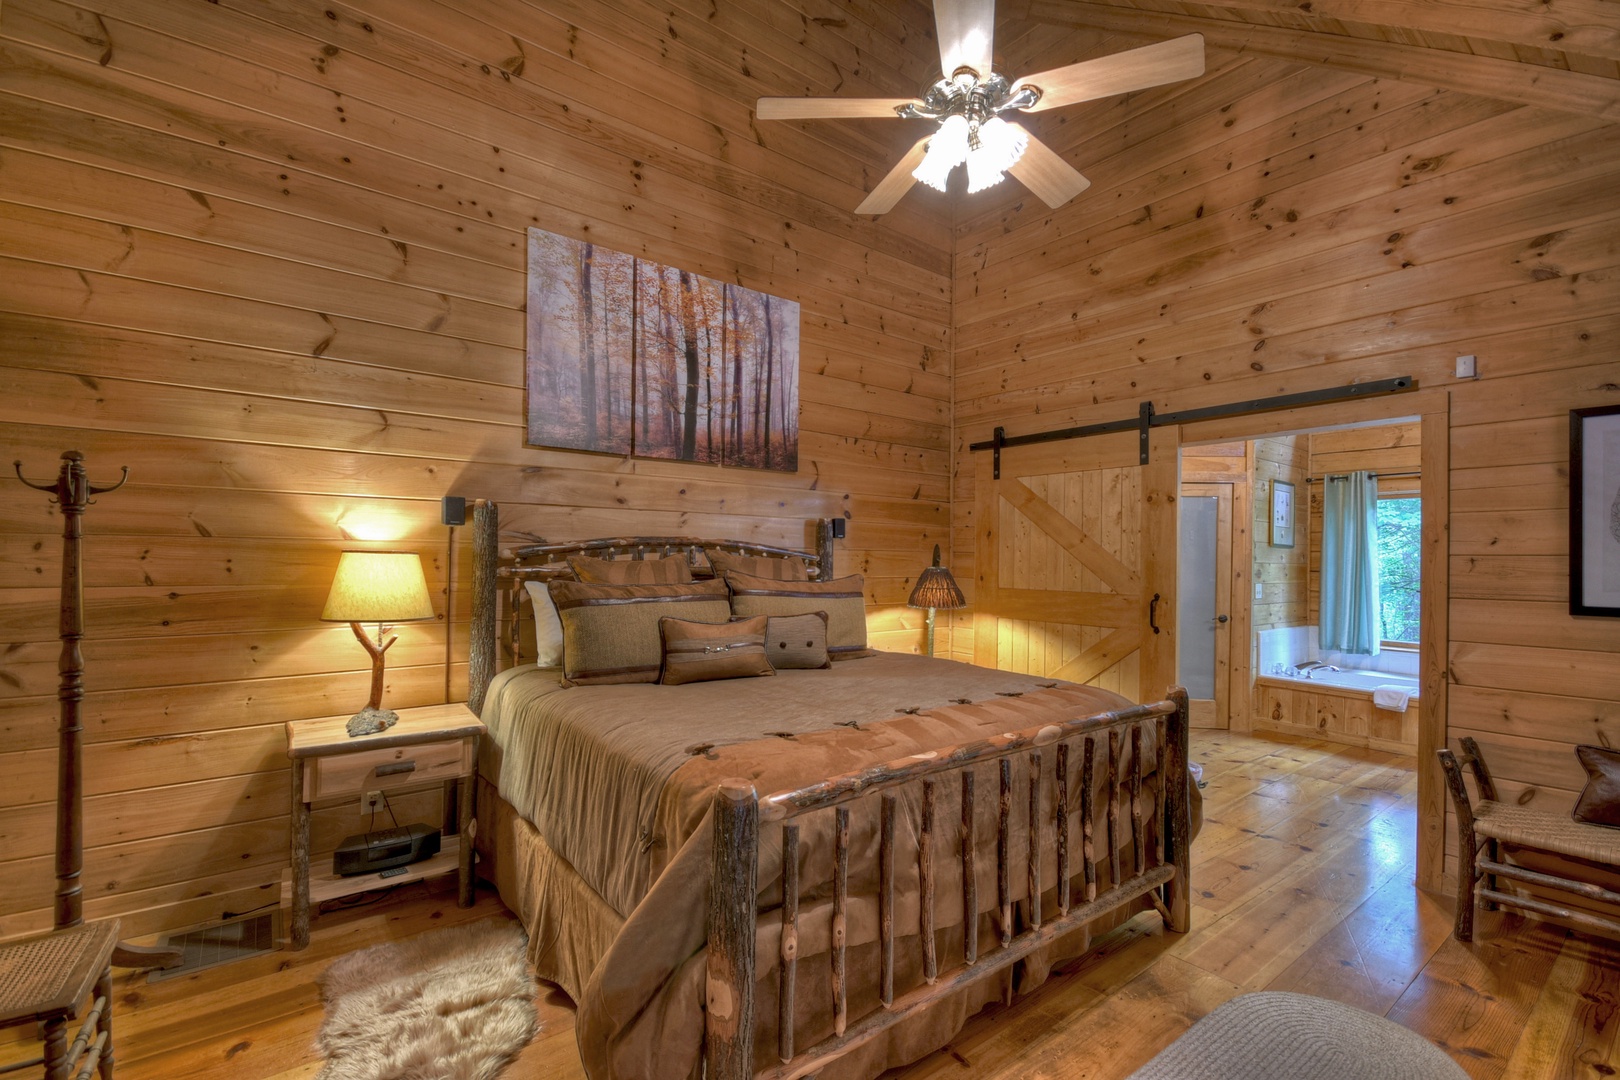 Falling Leaf- Master bedroom with rustic furnishings and master bathroom access